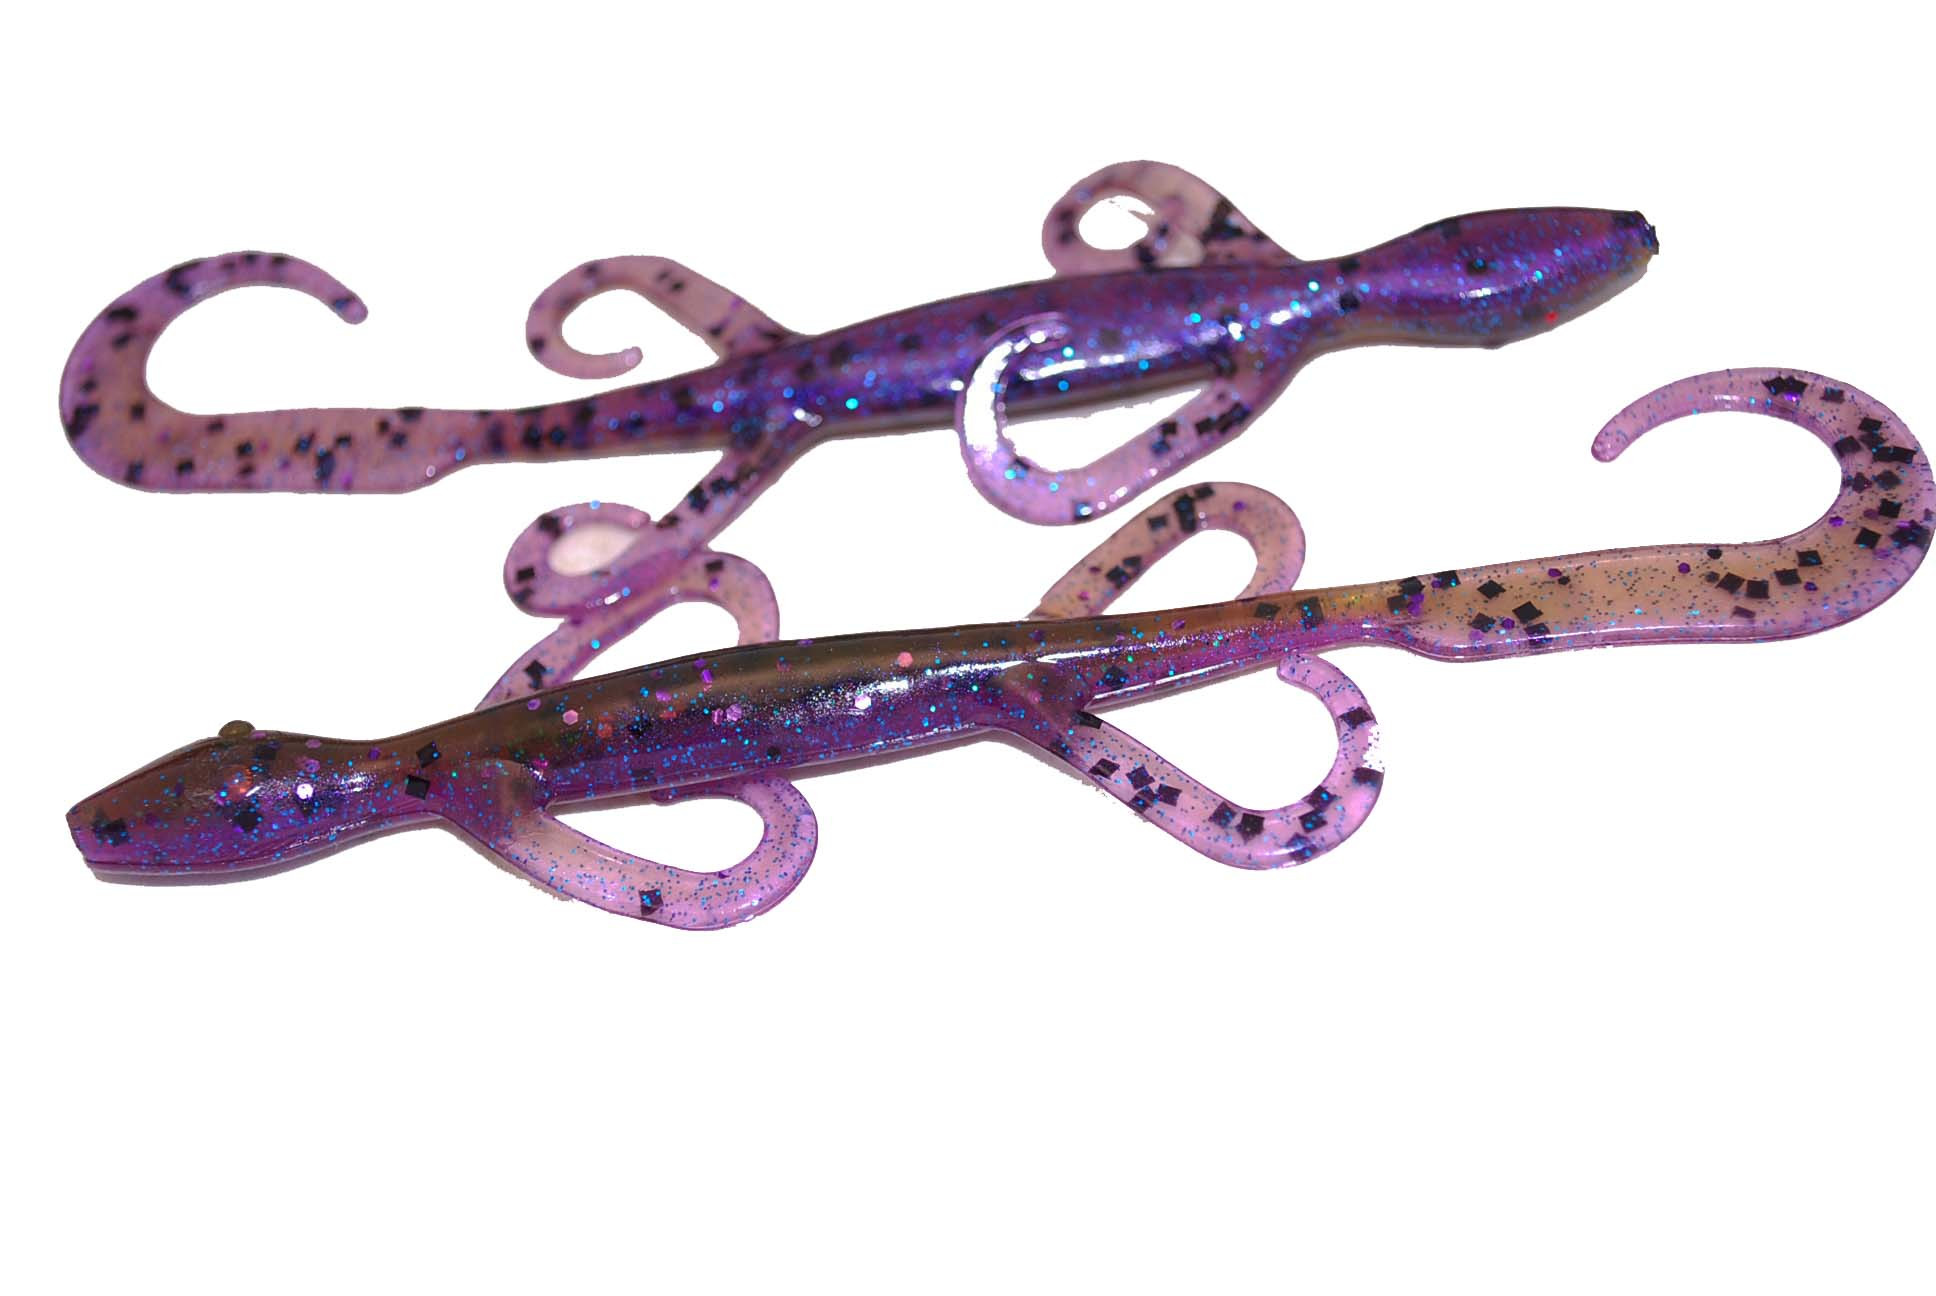 Clearance Chasebaits Frill Seeker Lure Lizard store United States - in stock